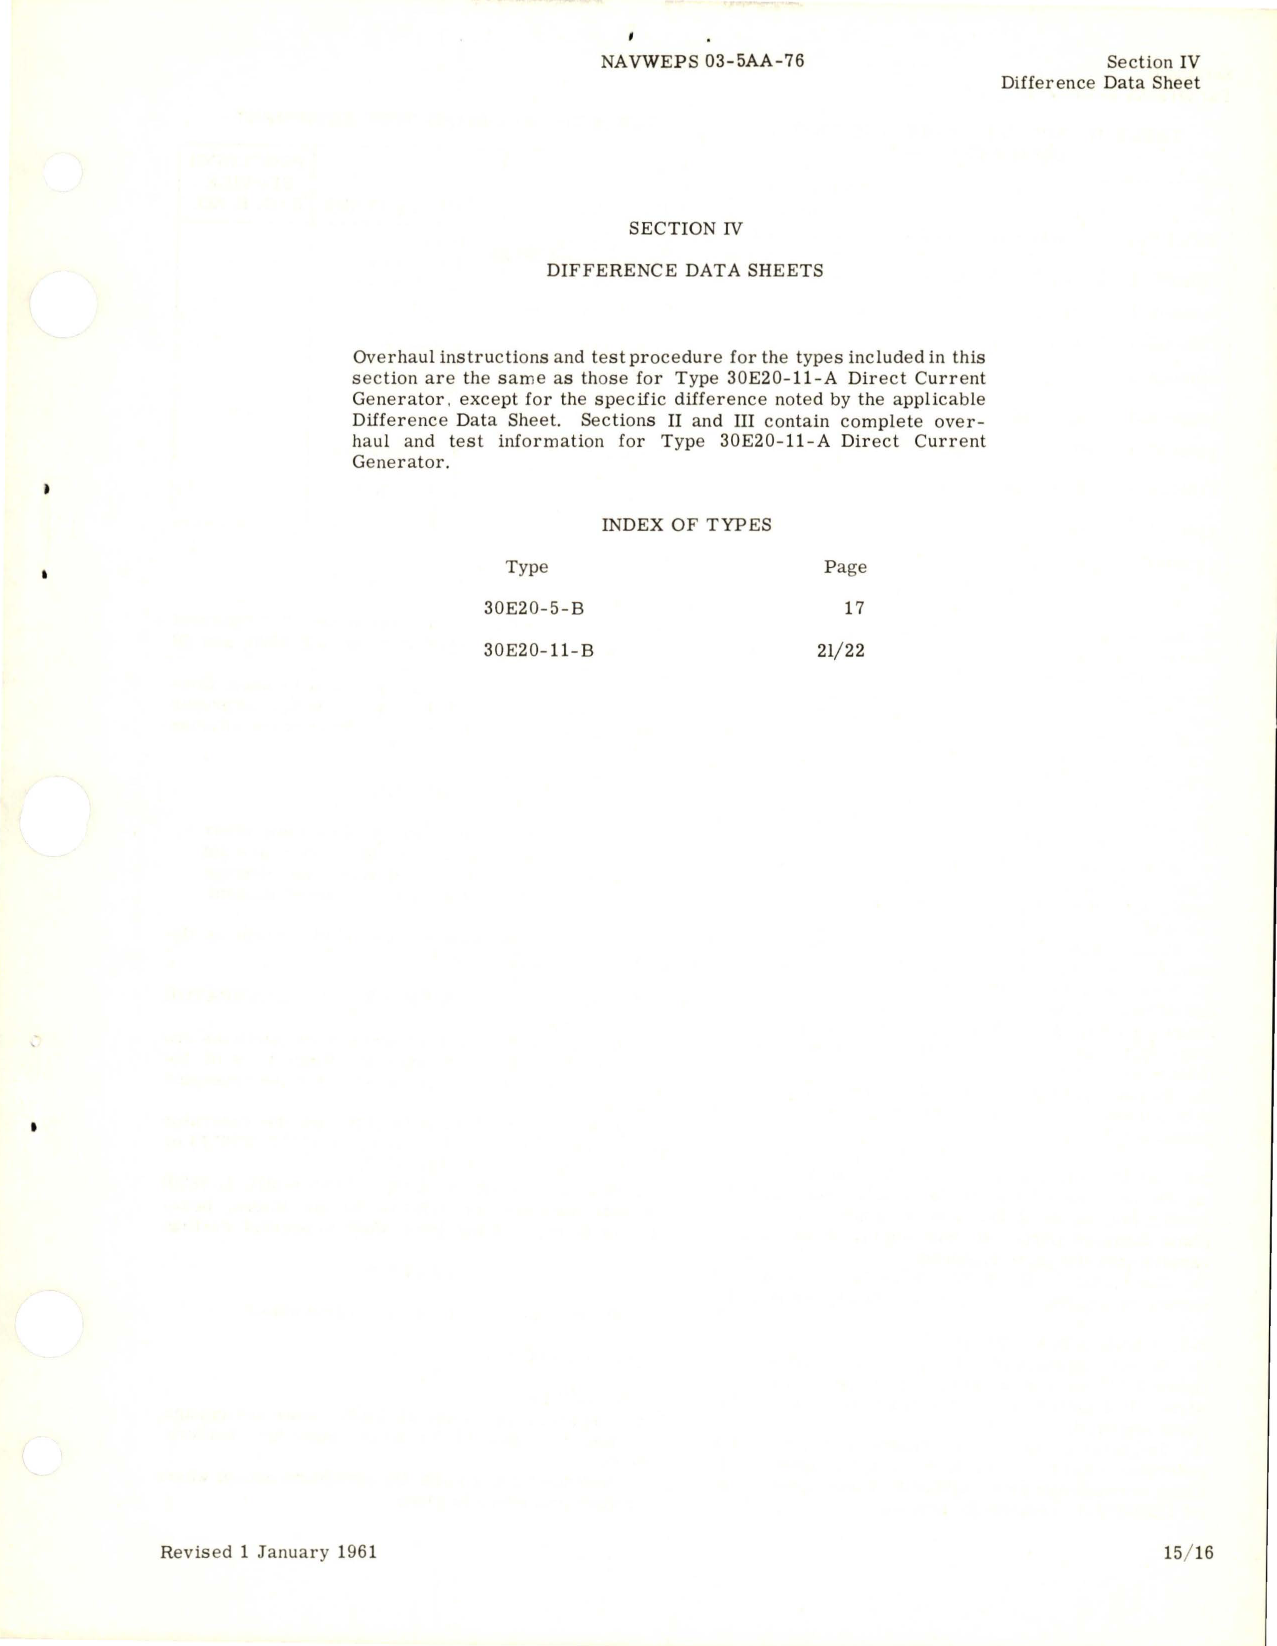 Sample page 7 from AirCorps Library document: Overhaul Instructions for Direct Current Generator - Type 30E20-5-B, 30E20-11-A, and 30E20-11-B